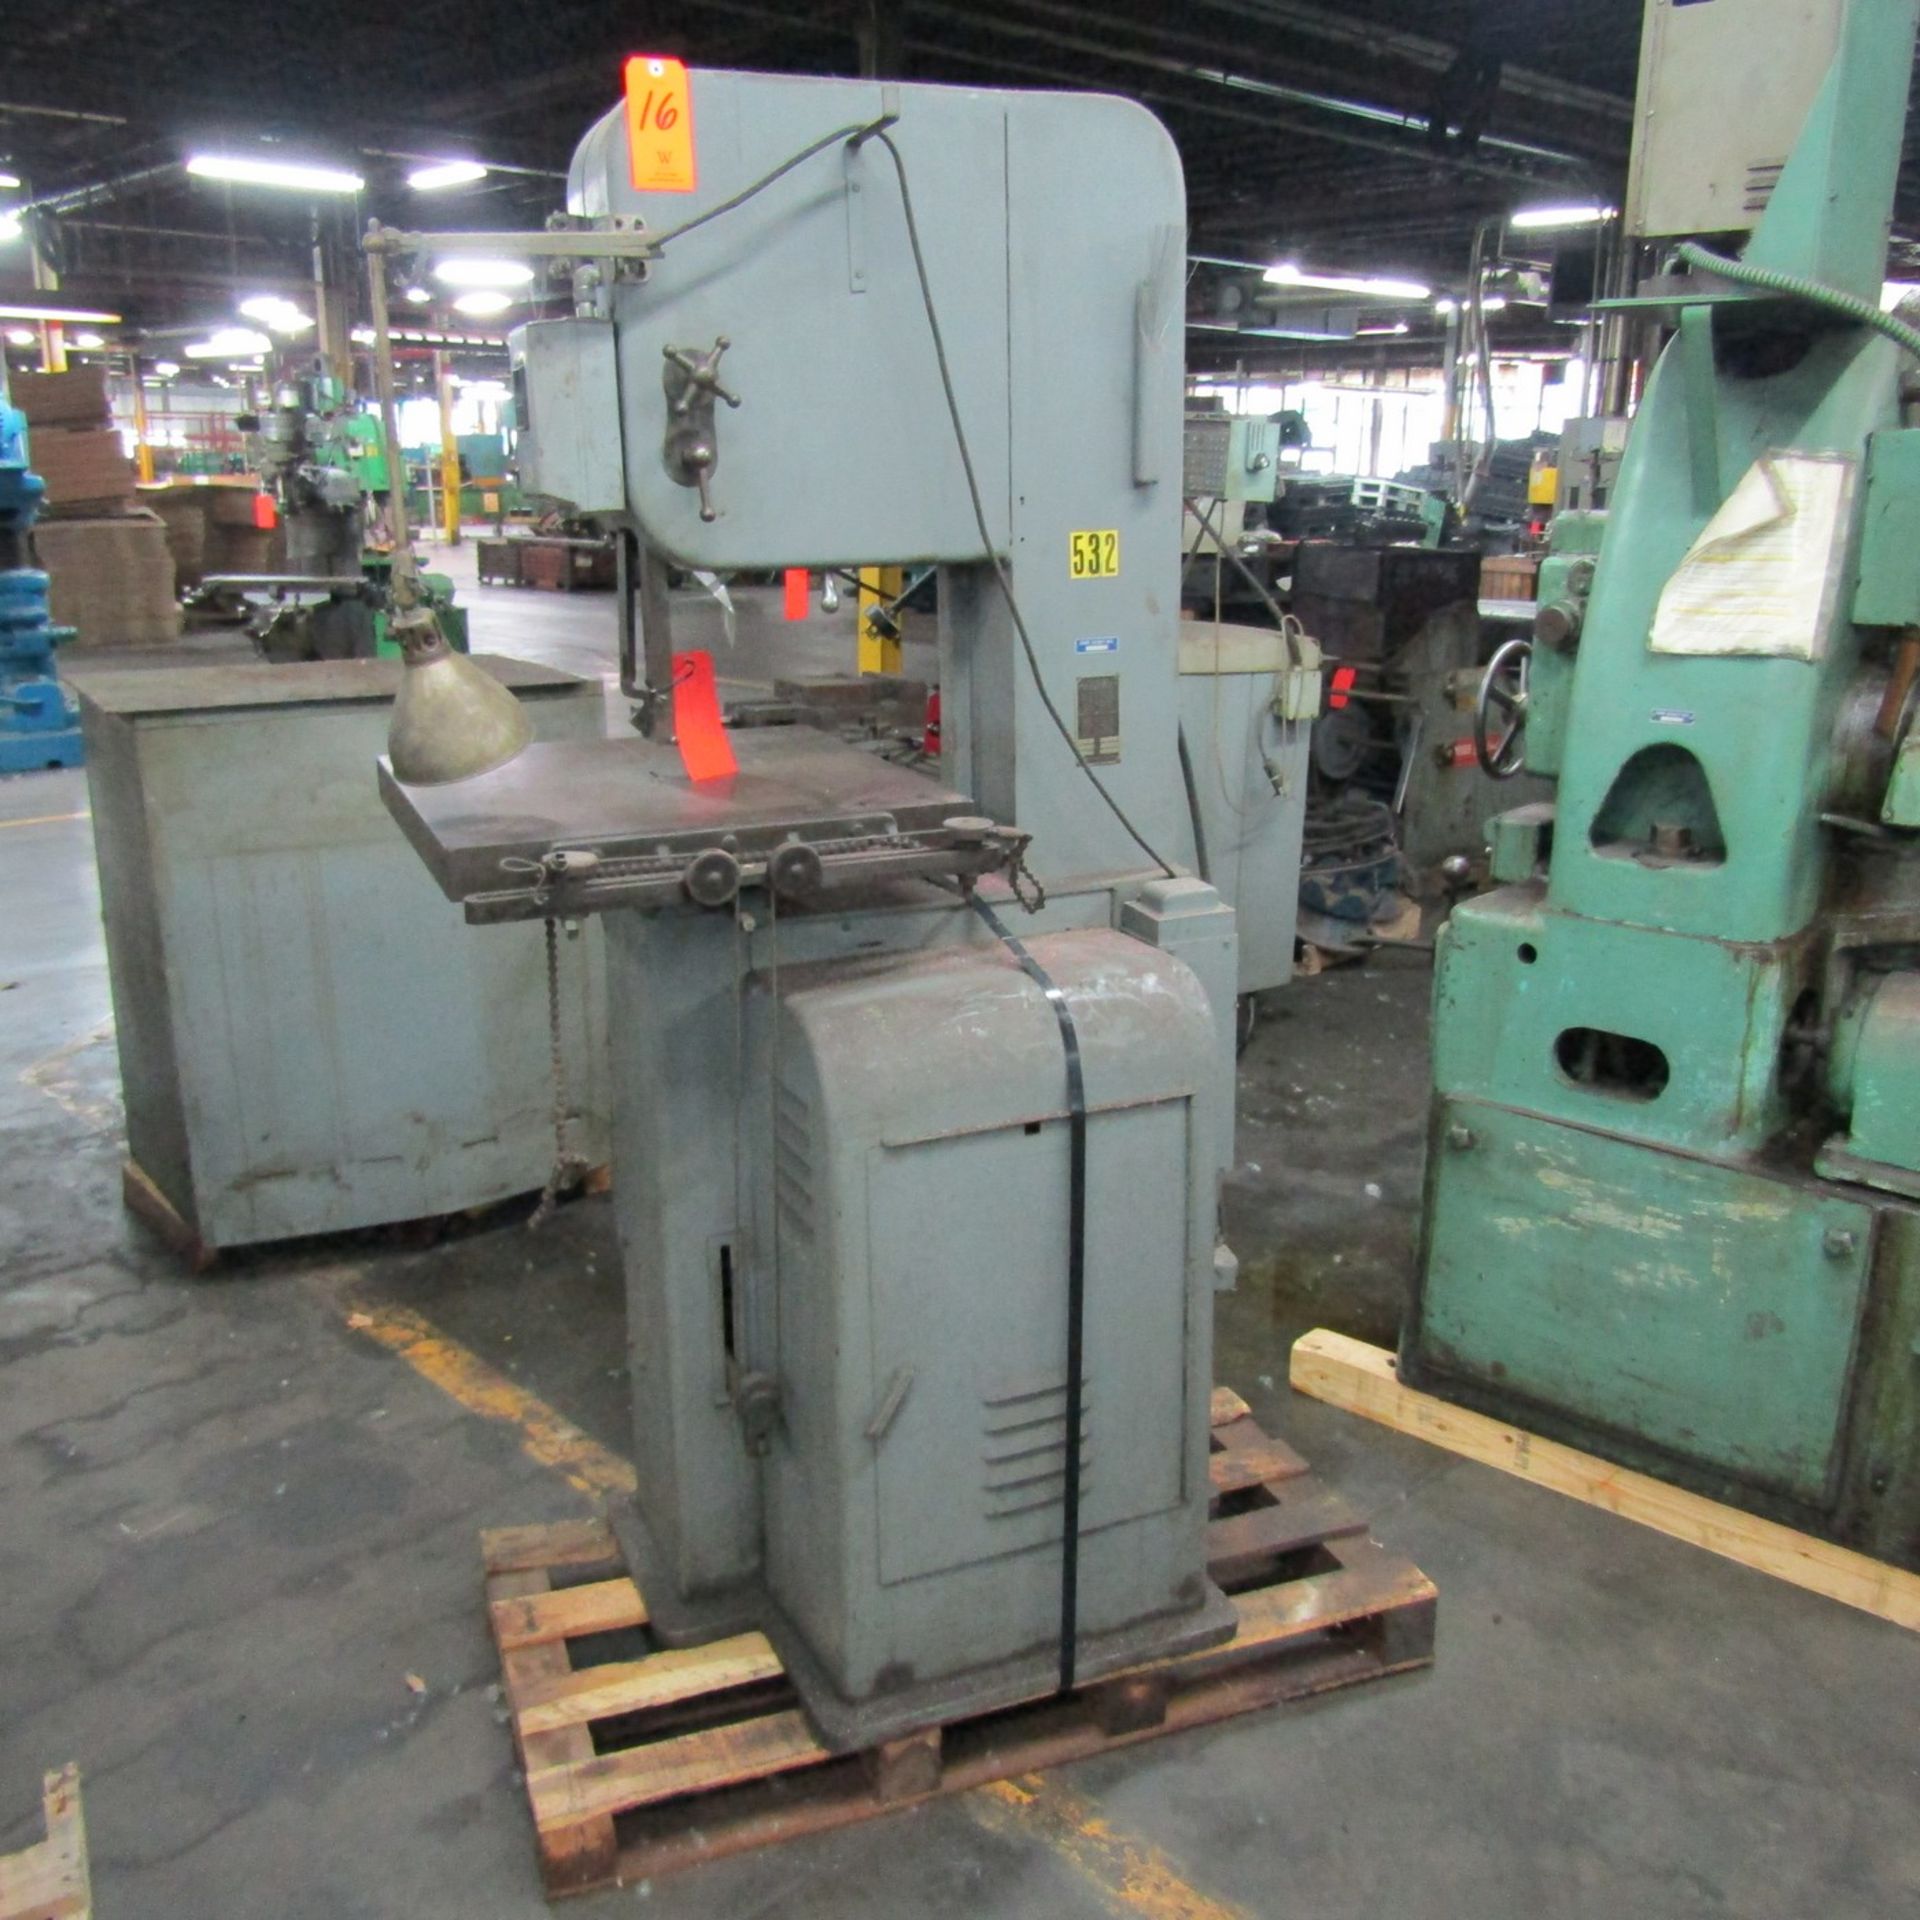 DoAll 16 in. Model Metalmaster Job Selector Tilting Table Vertical Band Saw, S/N: 423406; with Model - Image 2 of 5